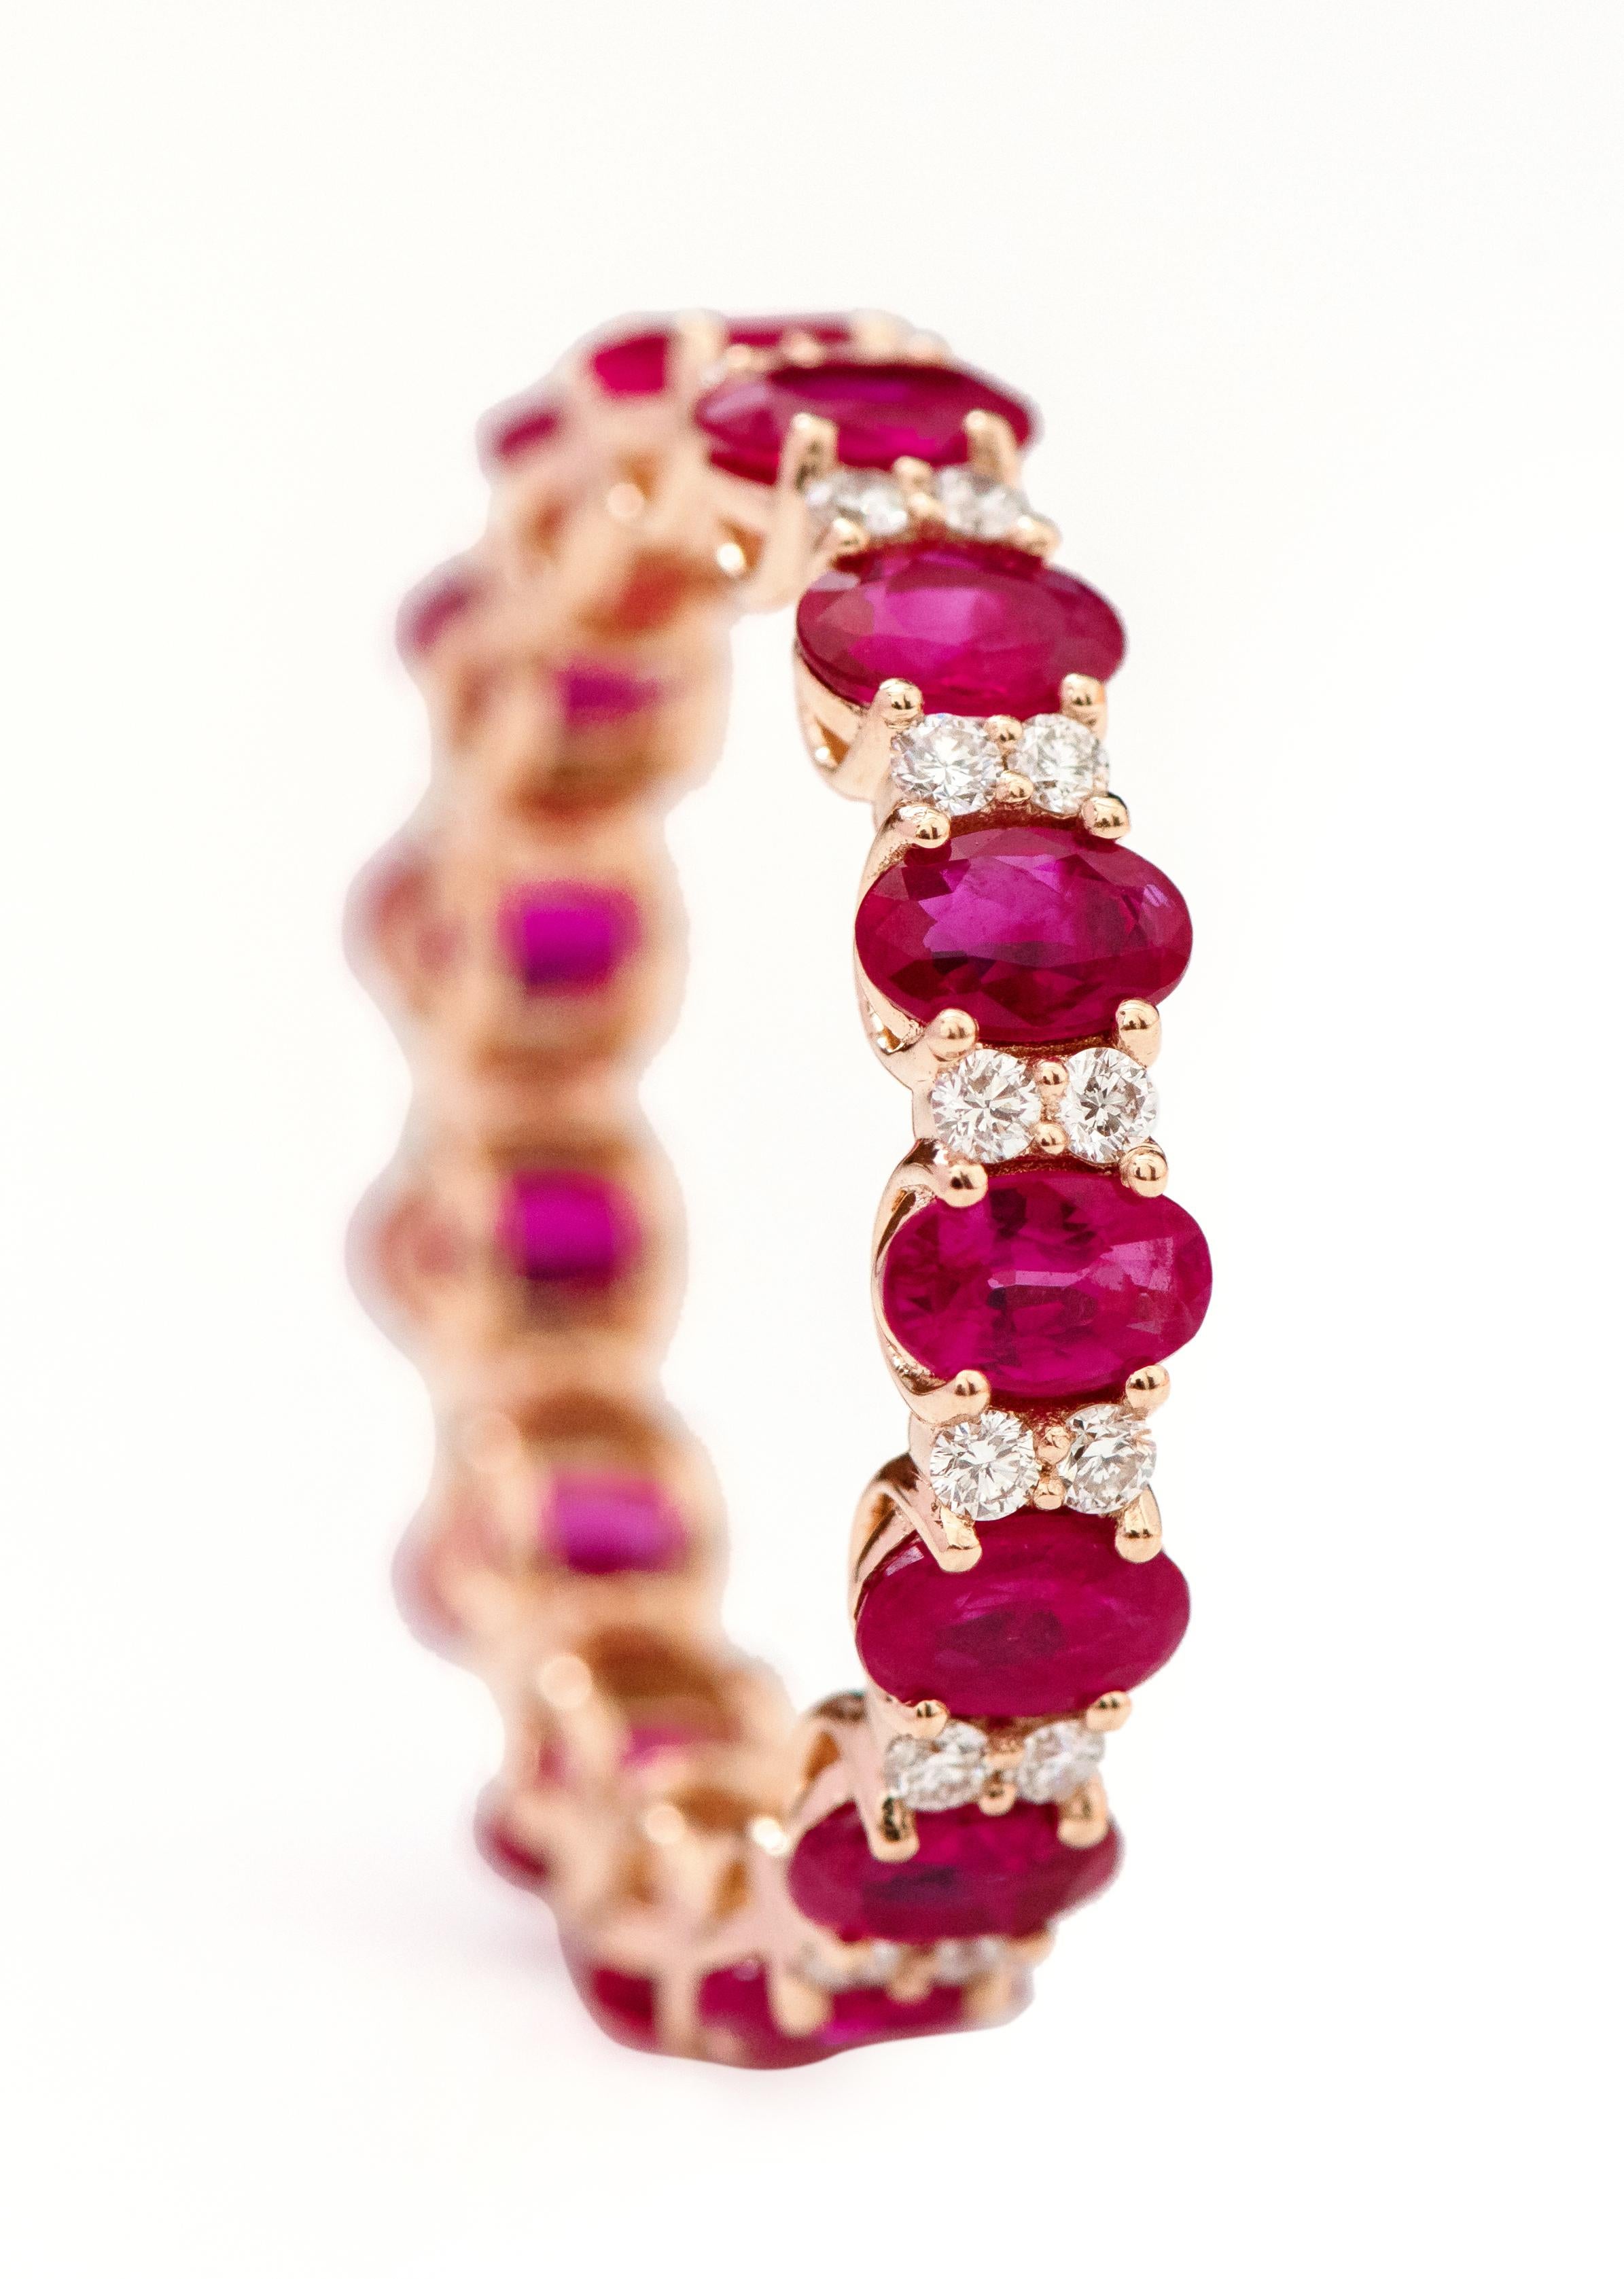 18 Karat Rose Gold 4.00 Carat Oval-Cut Ruby and Diamond Eternity Band Ring

This enchanting vivid red ruby and diamond band is magnificent. The solitaire horizontally placed oval shape ruby in grain prong setting is complemented with two round